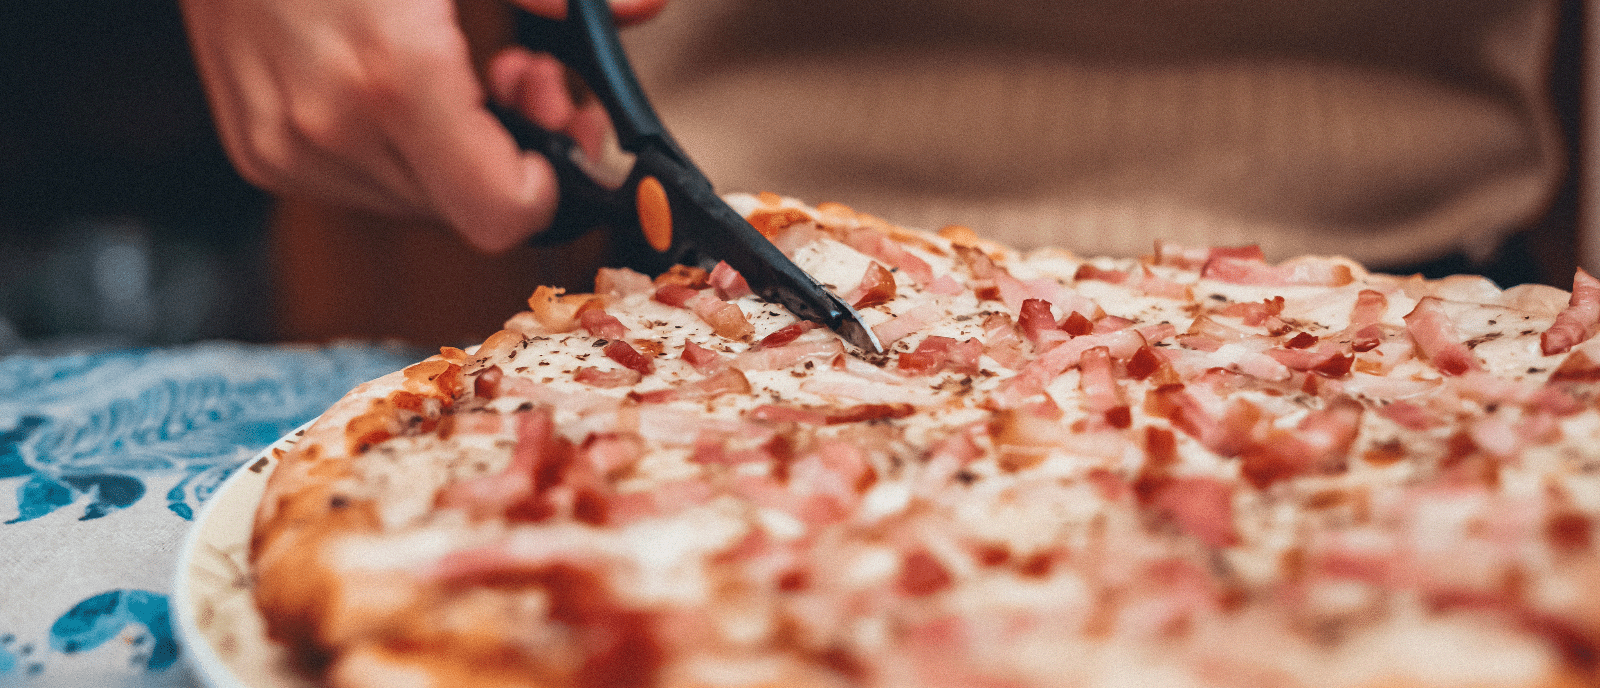 Cutting a pizza with scissors.